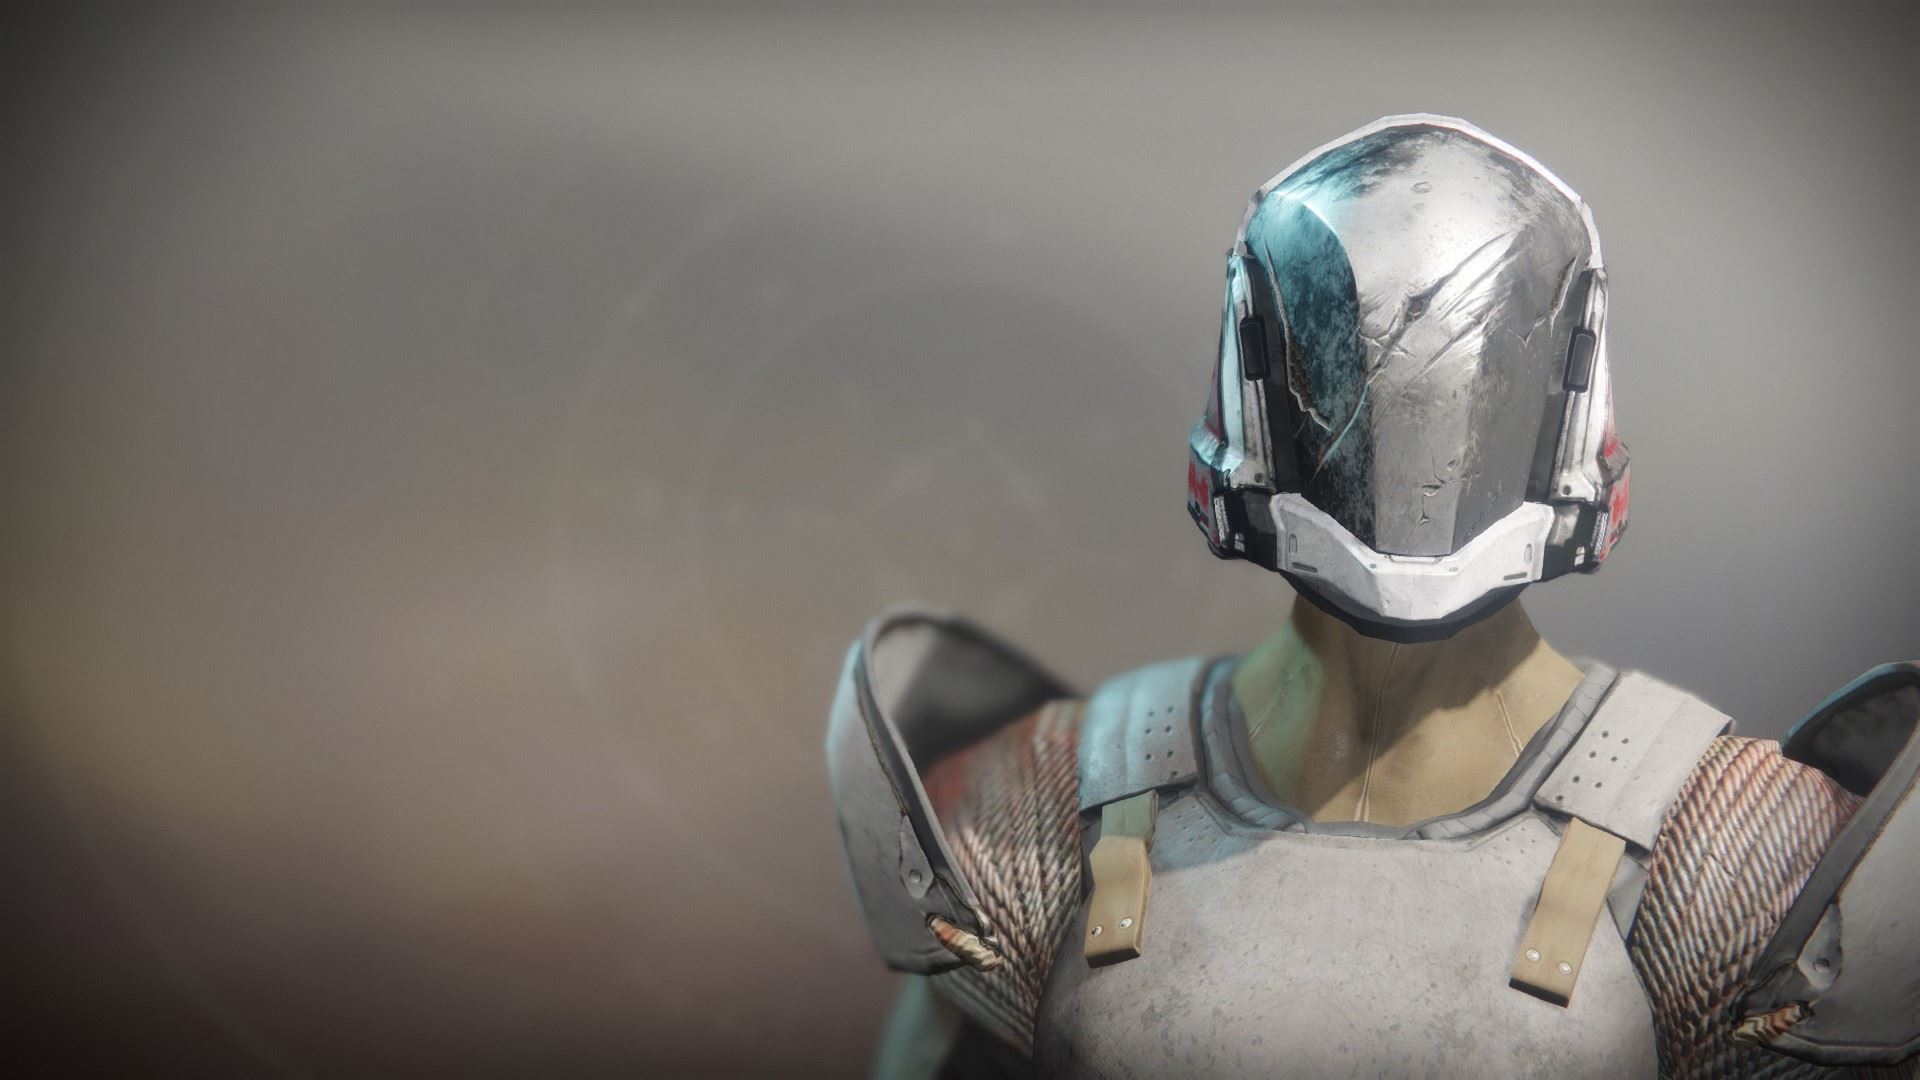 An in-game render of the Solstice Helm (Scorched).